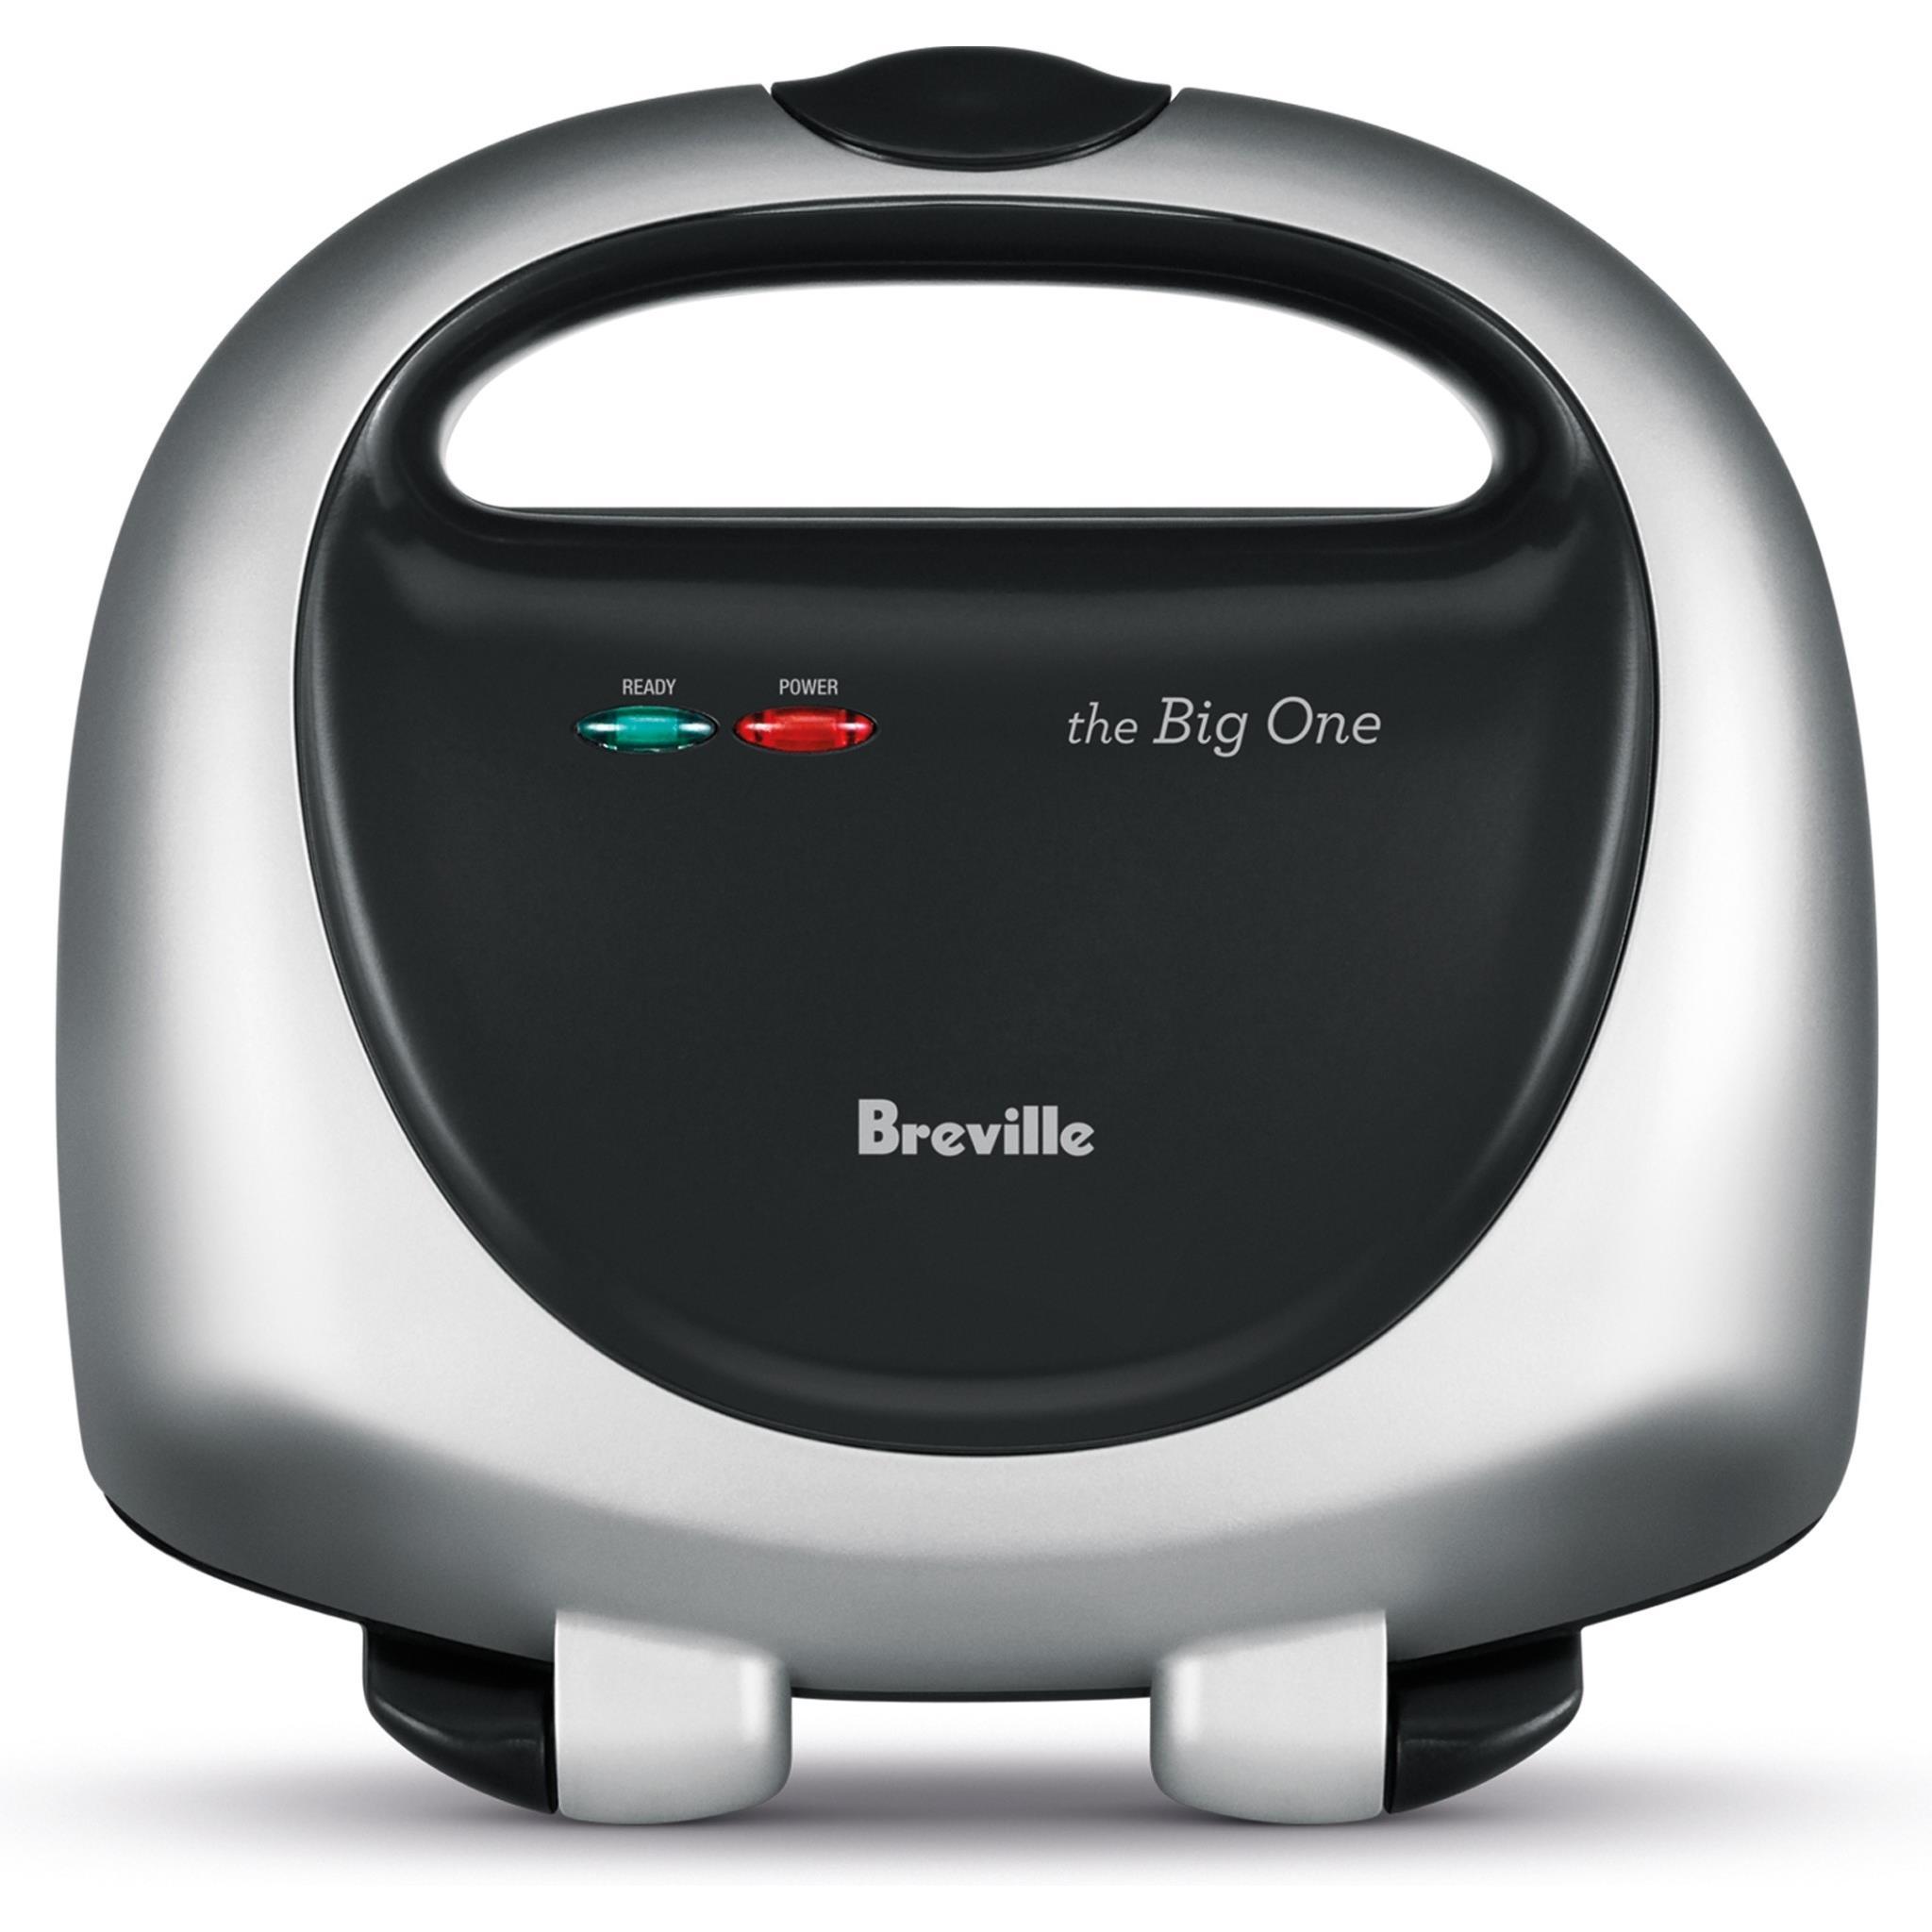 Image of Breville the Big One Toastie Maker